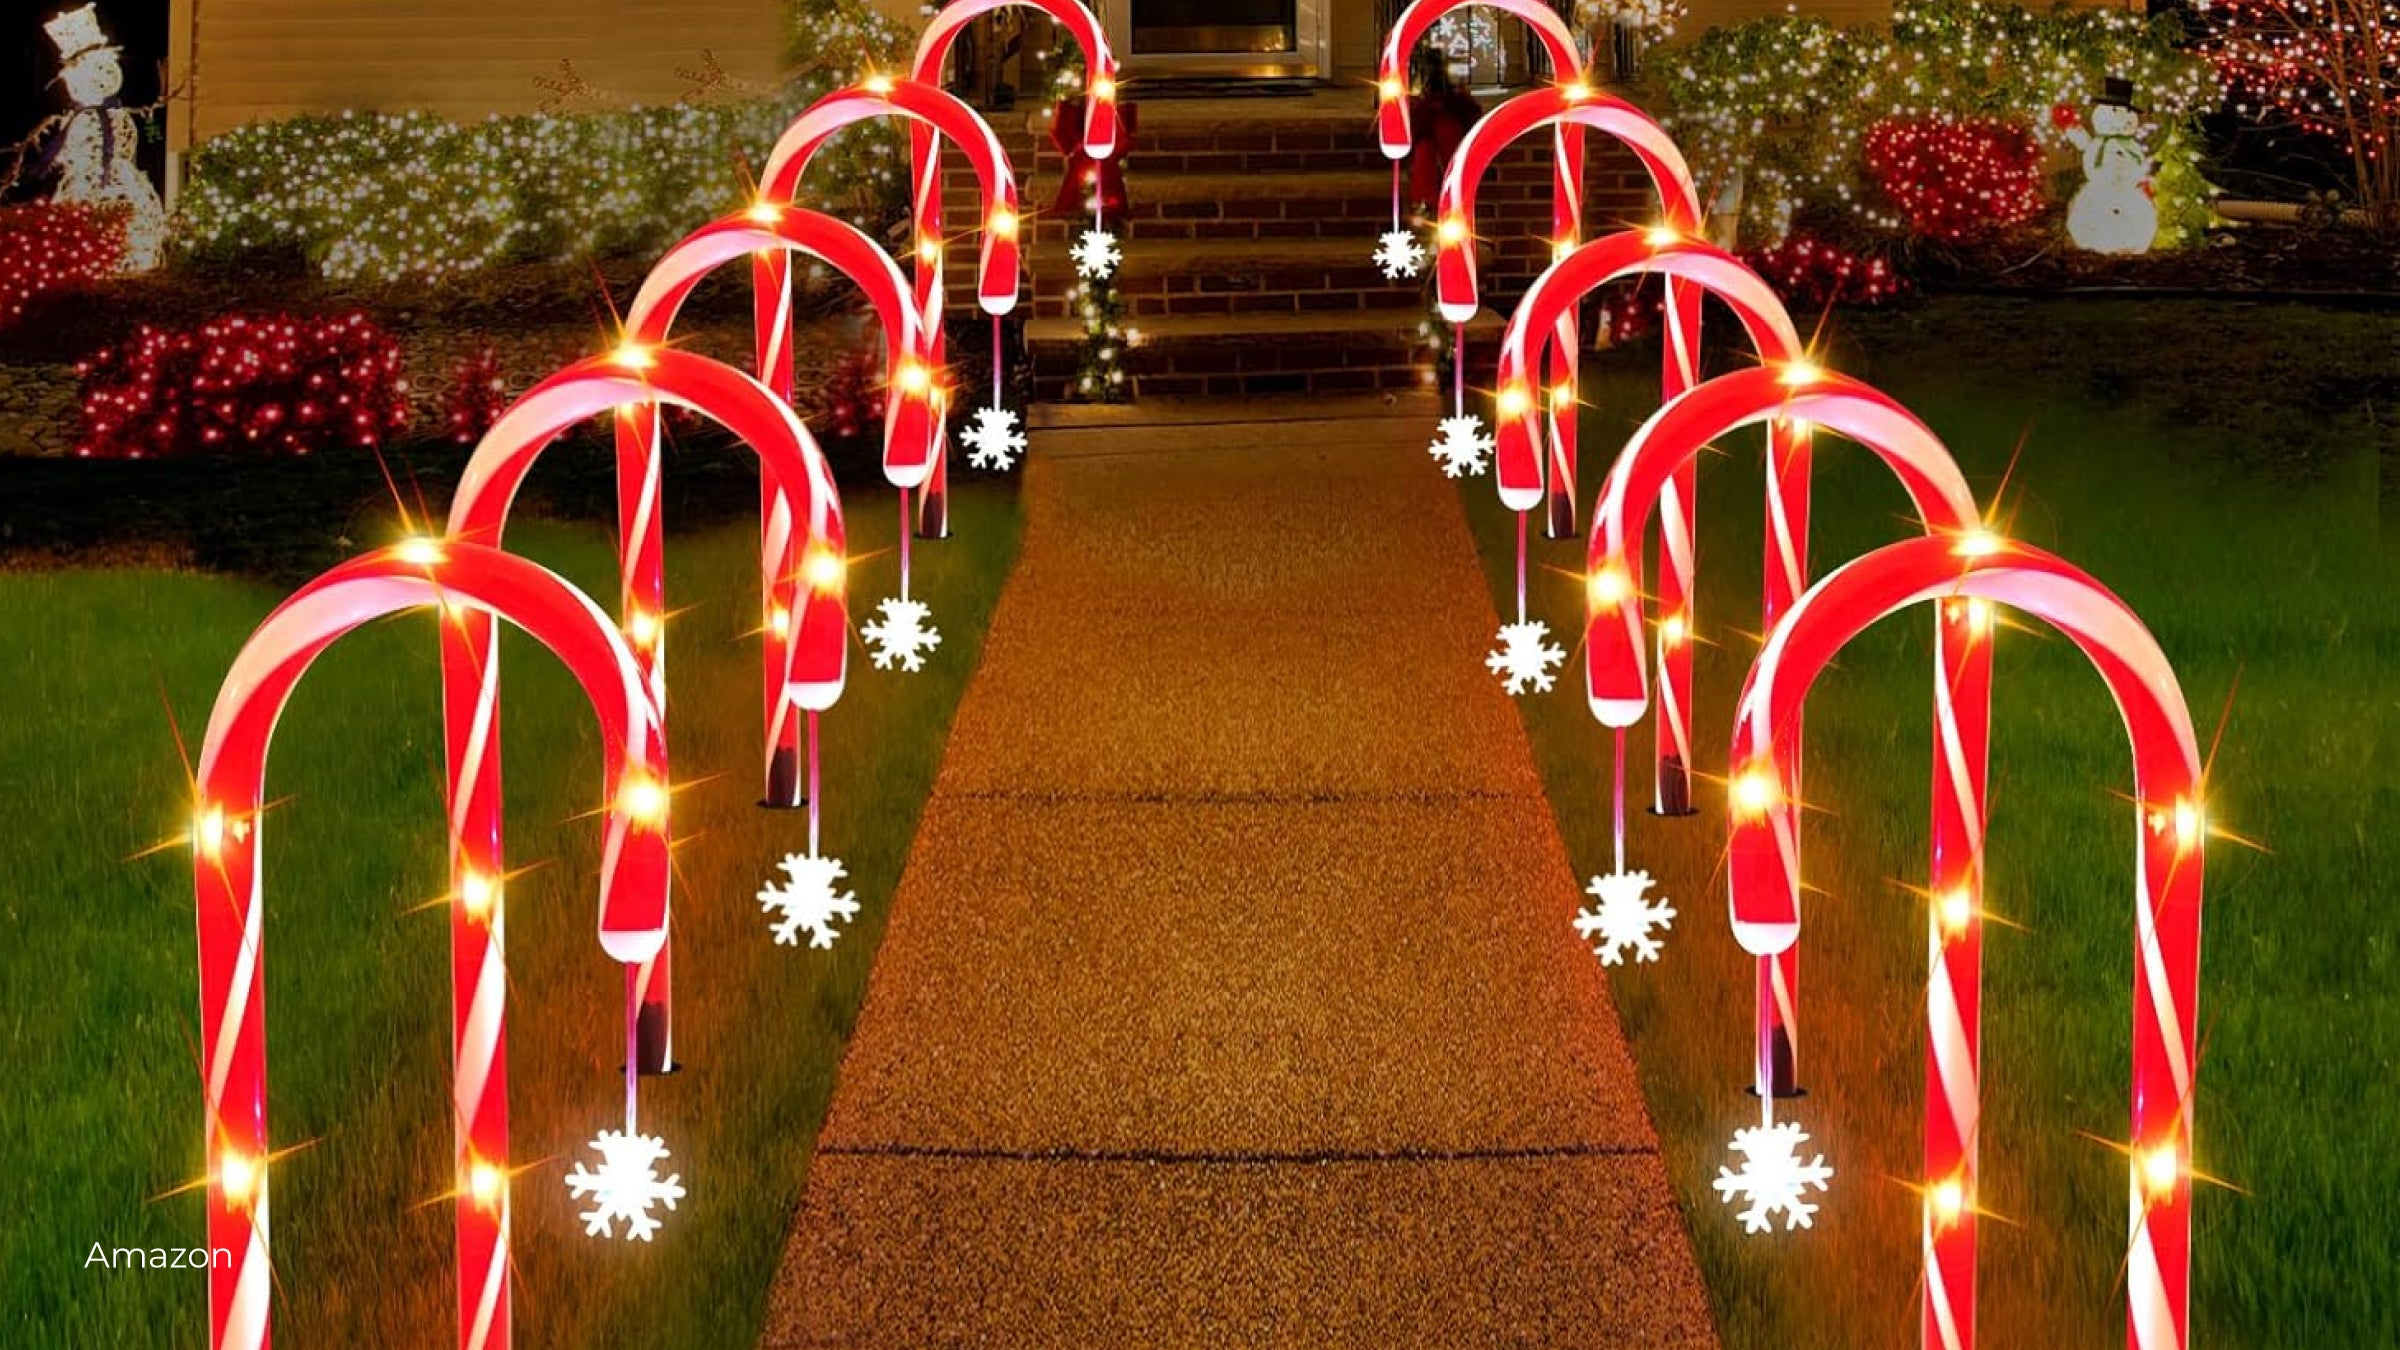 Two rows of illuminated peppermint candy canes line a walkway up to a house